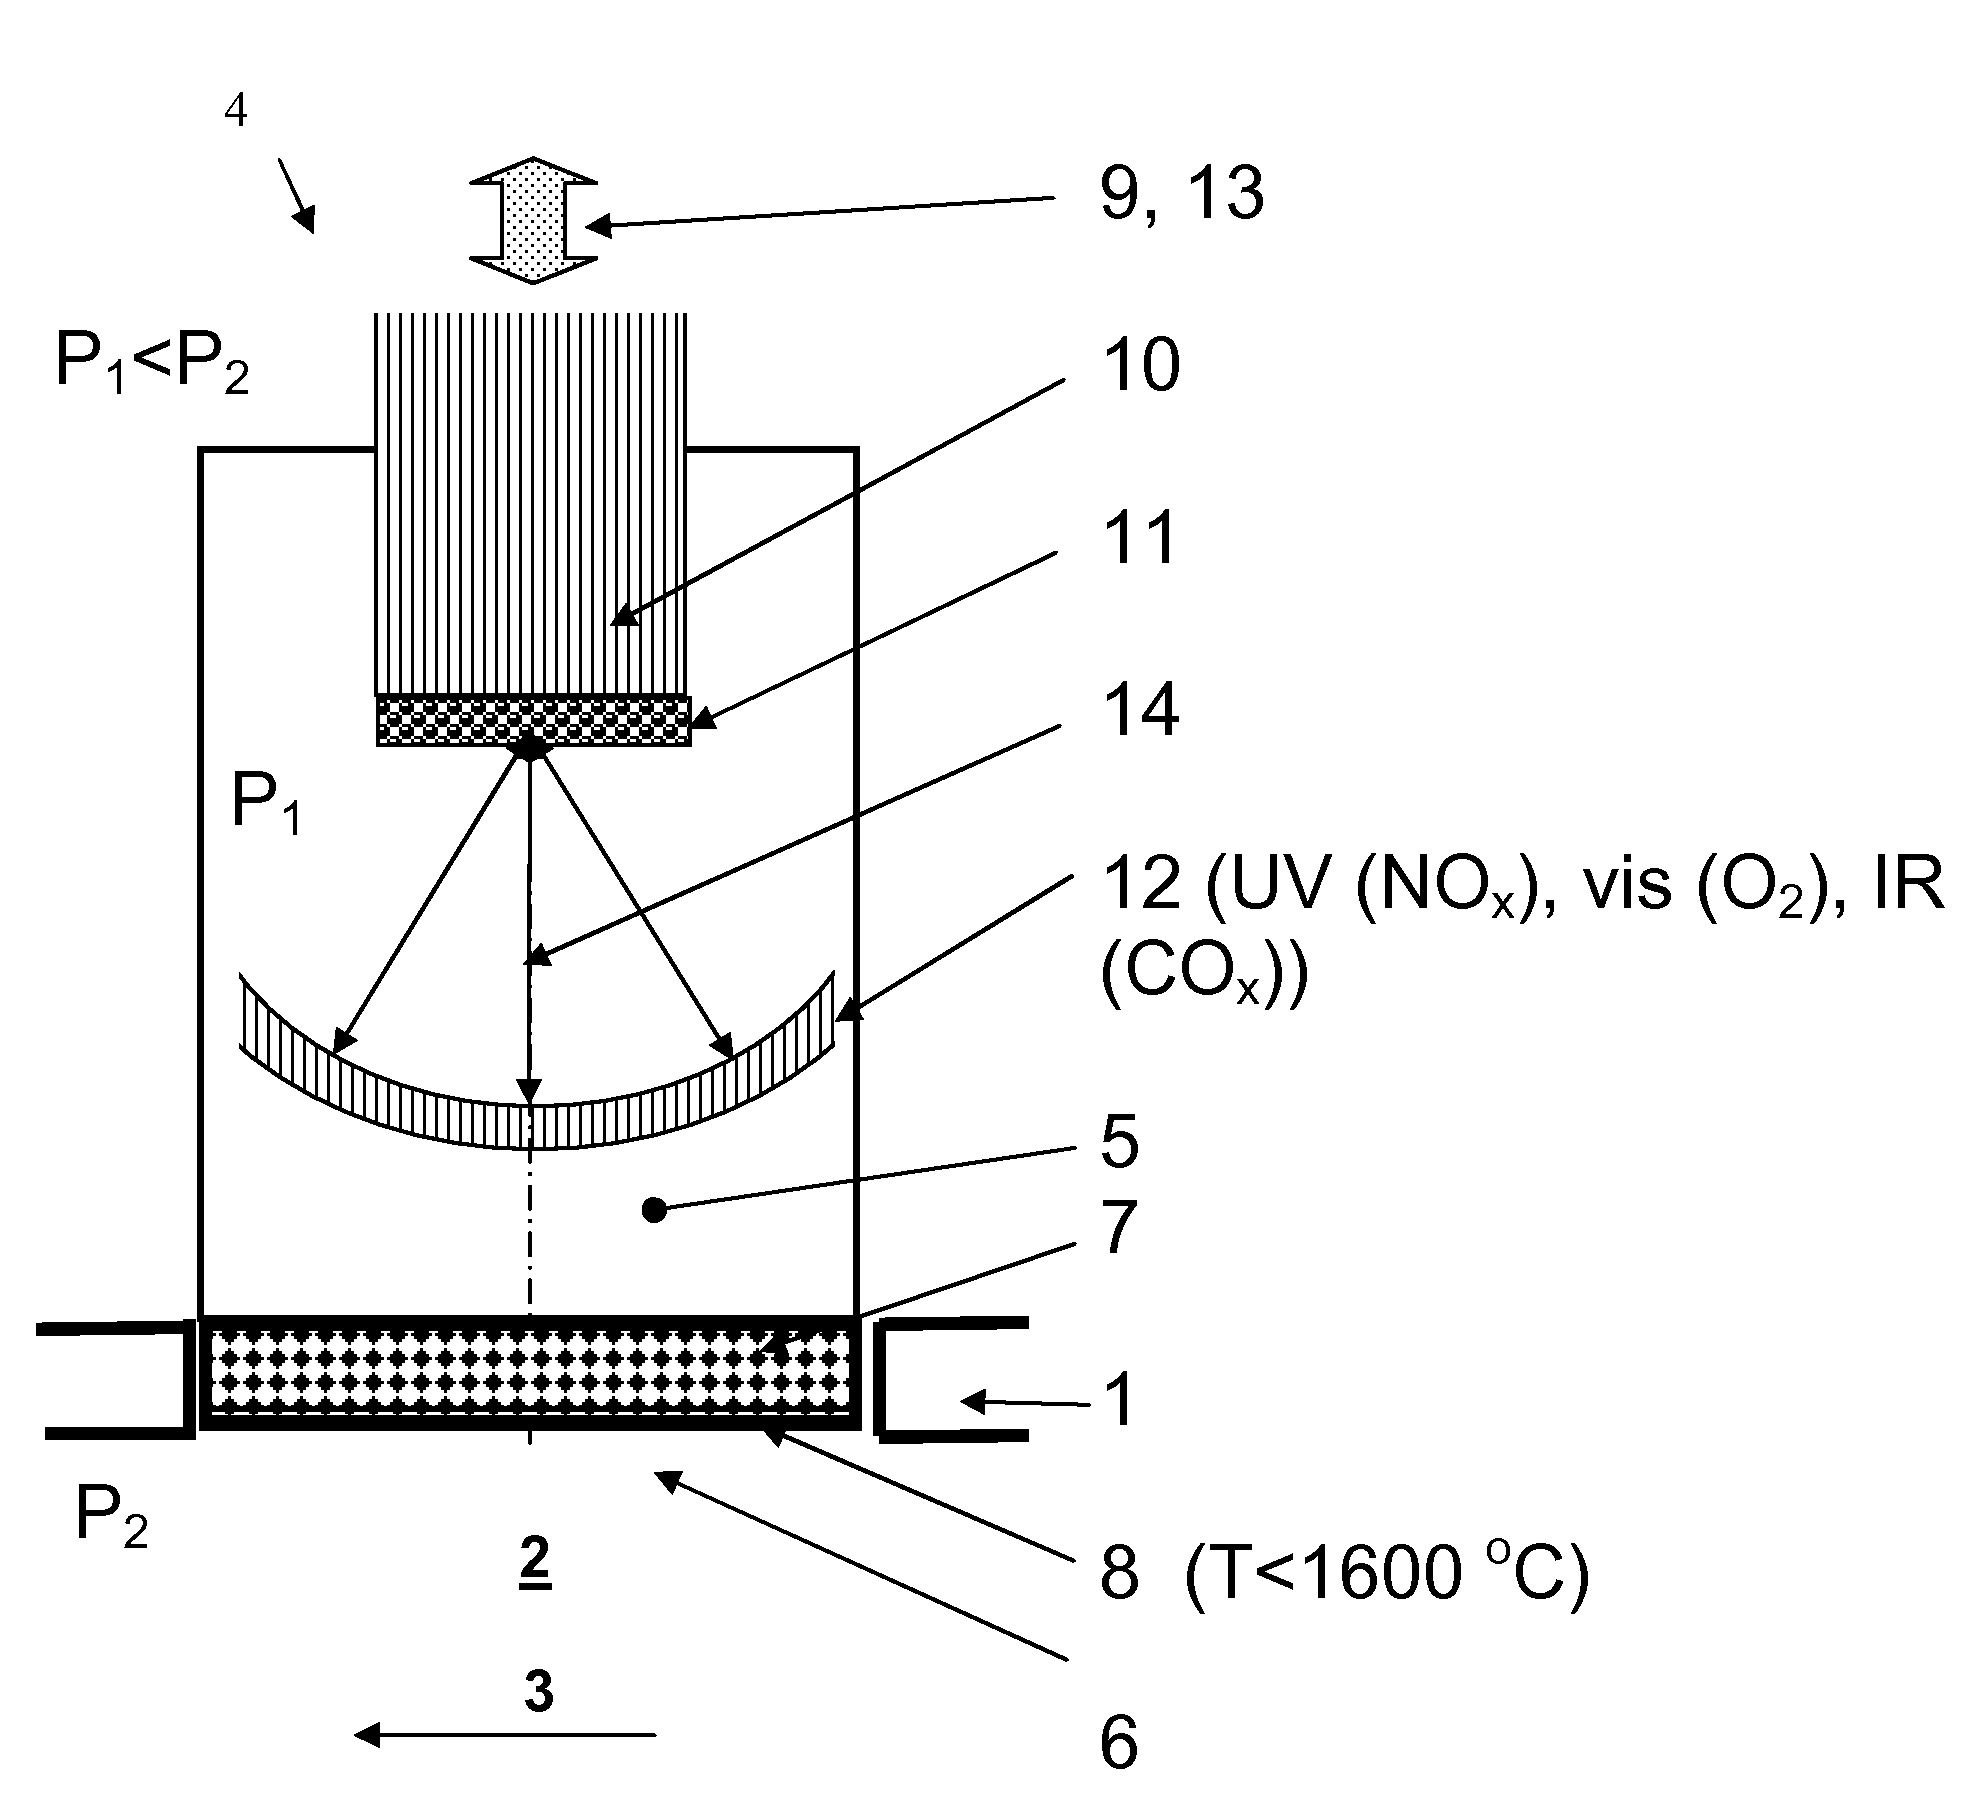 Optical sensor device for local analysis of a combustion process in a combustor of a thermal power plant